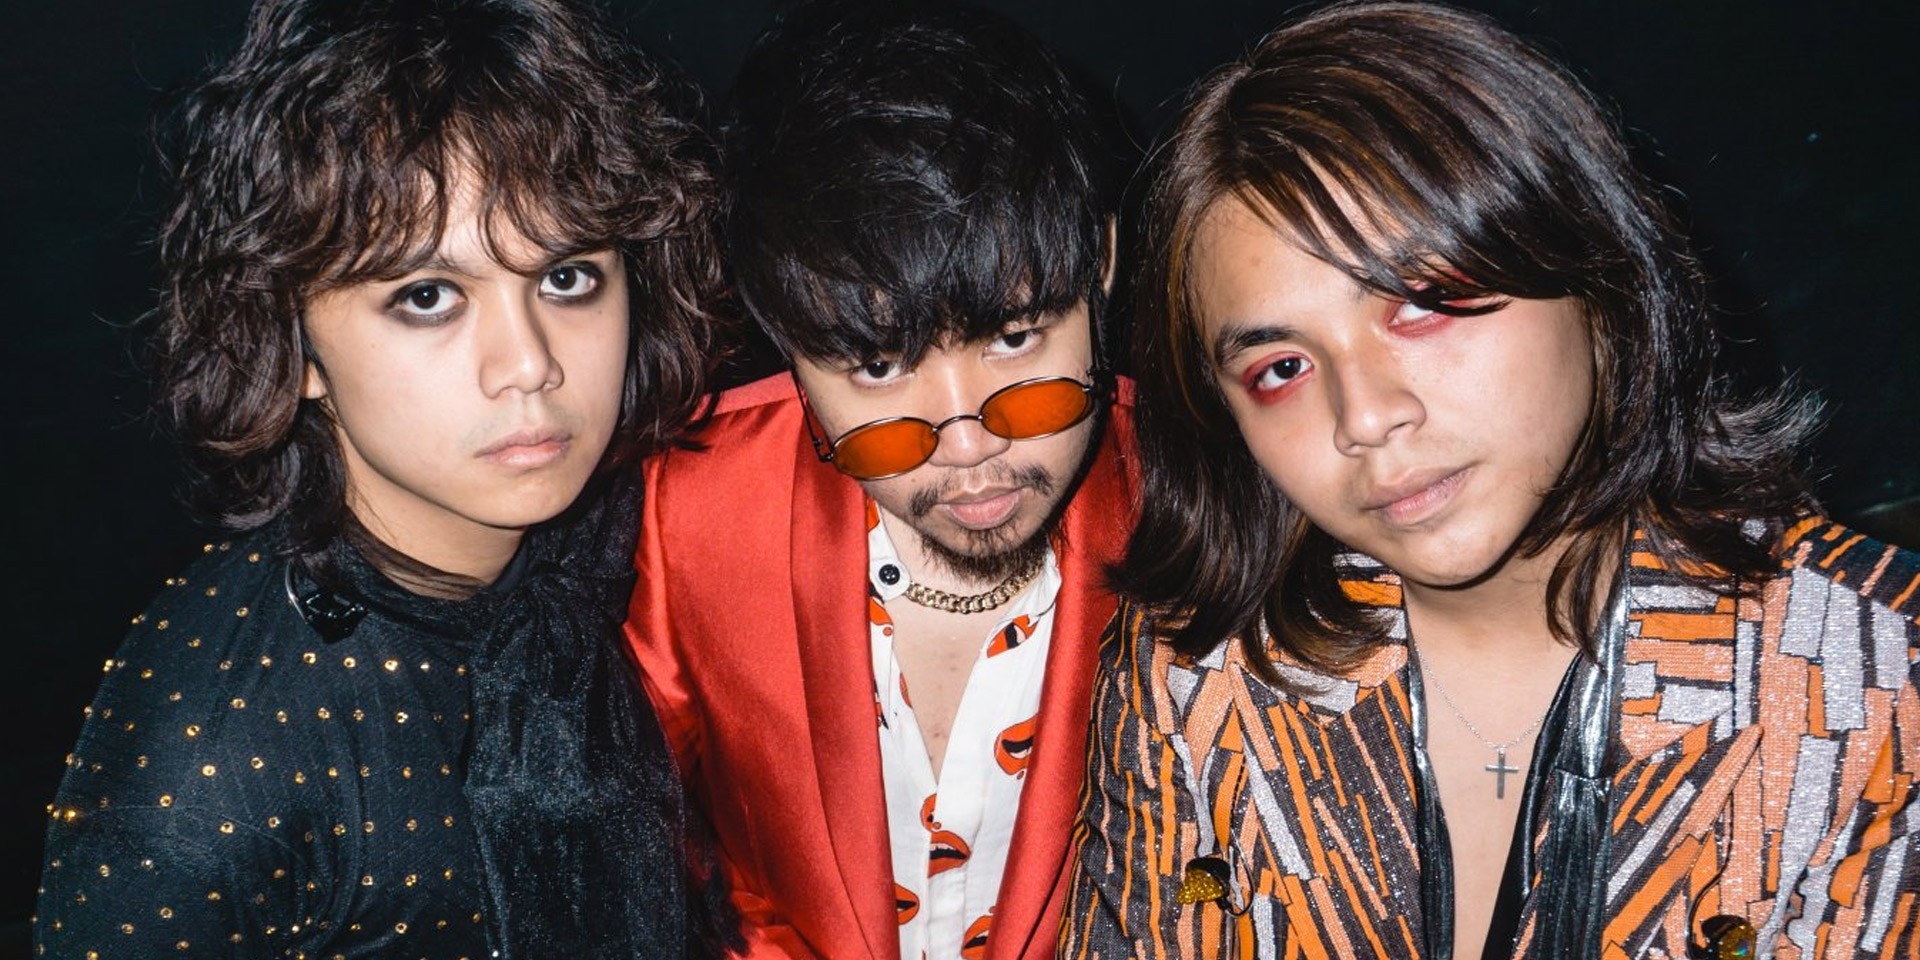 IV Of Spades to open Panic! at the Disco Manila concert